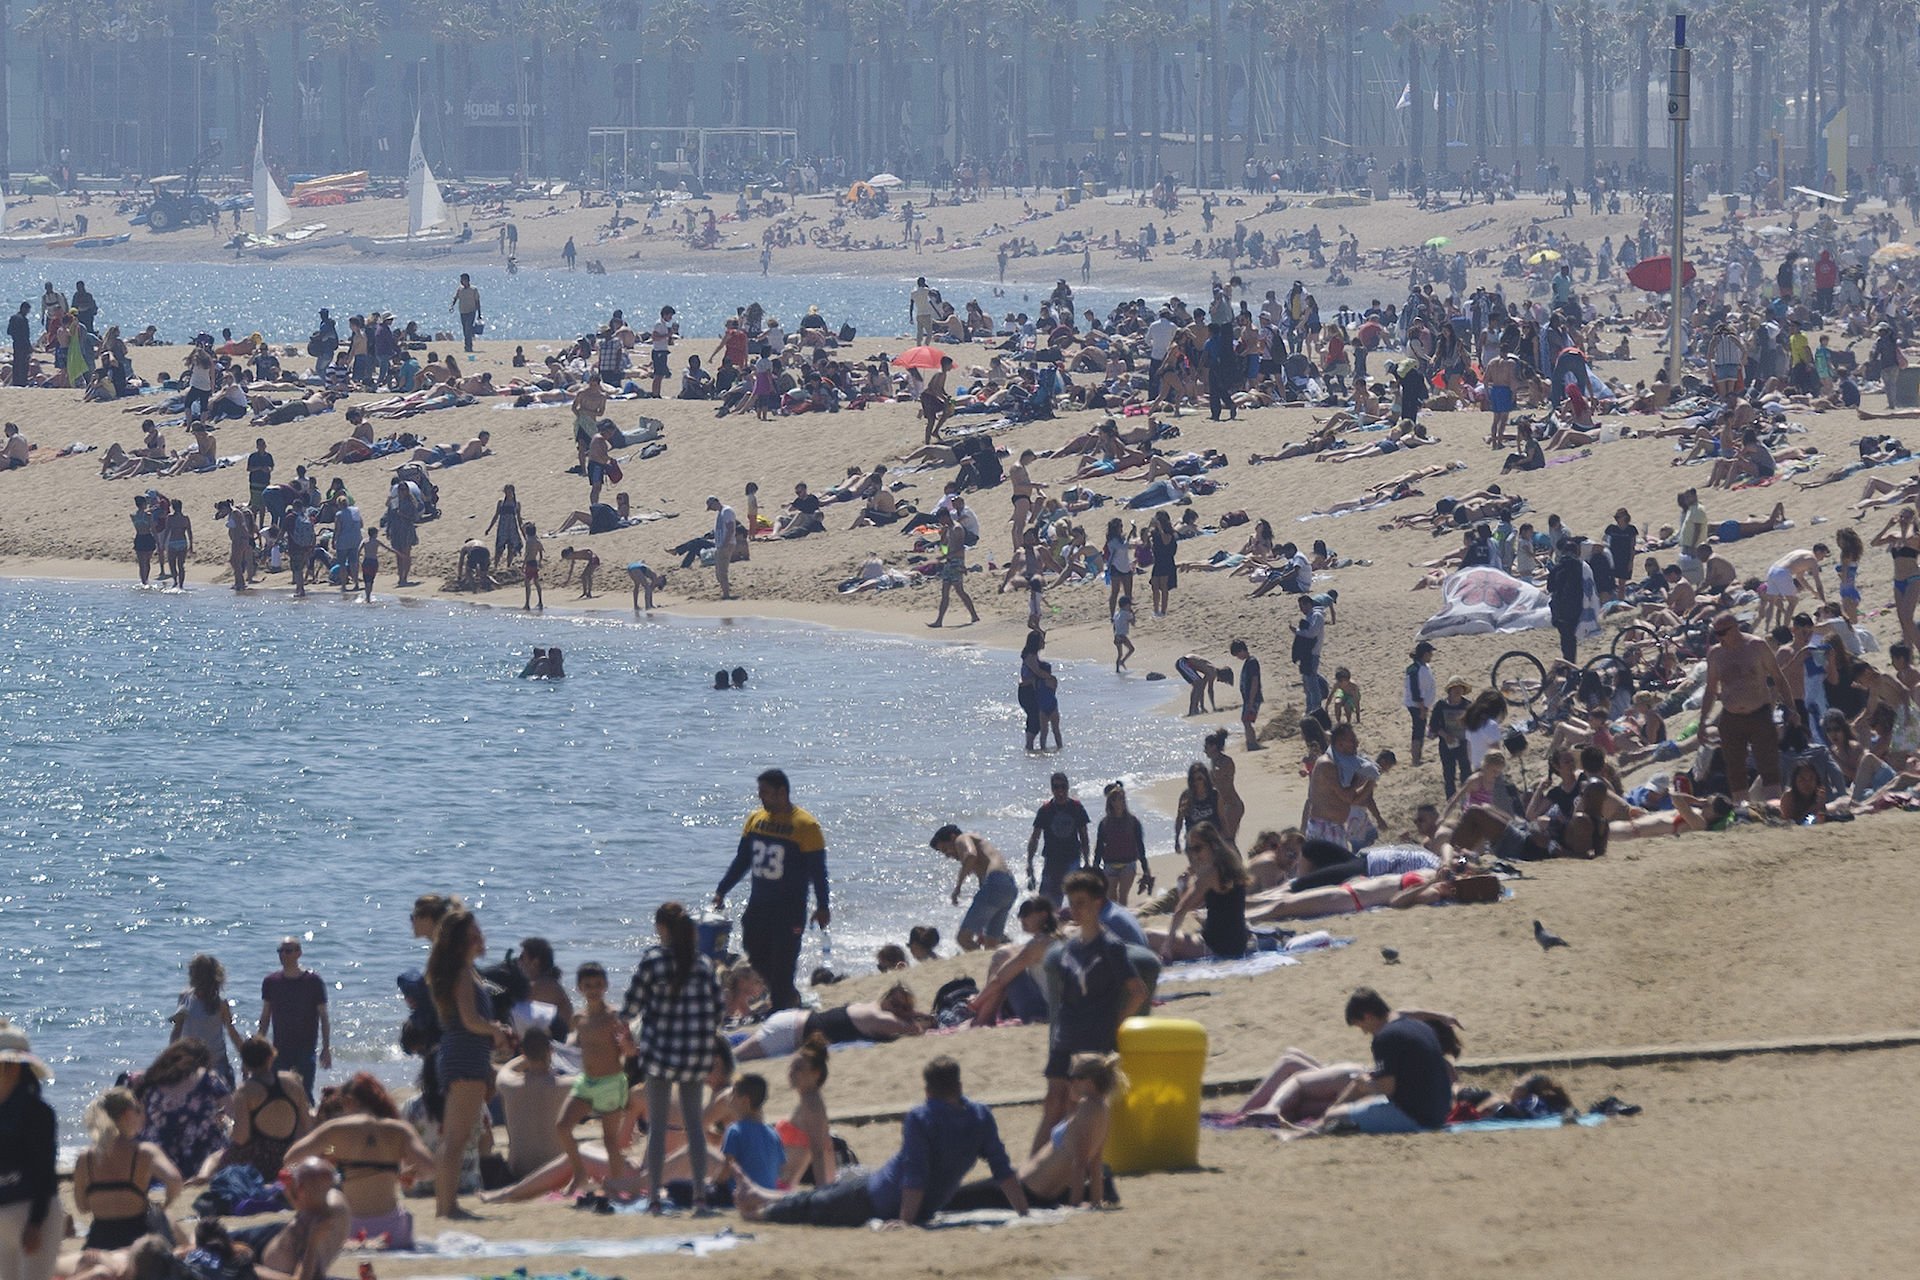 Record occupancy on Catalan coast due to fear of terrorism